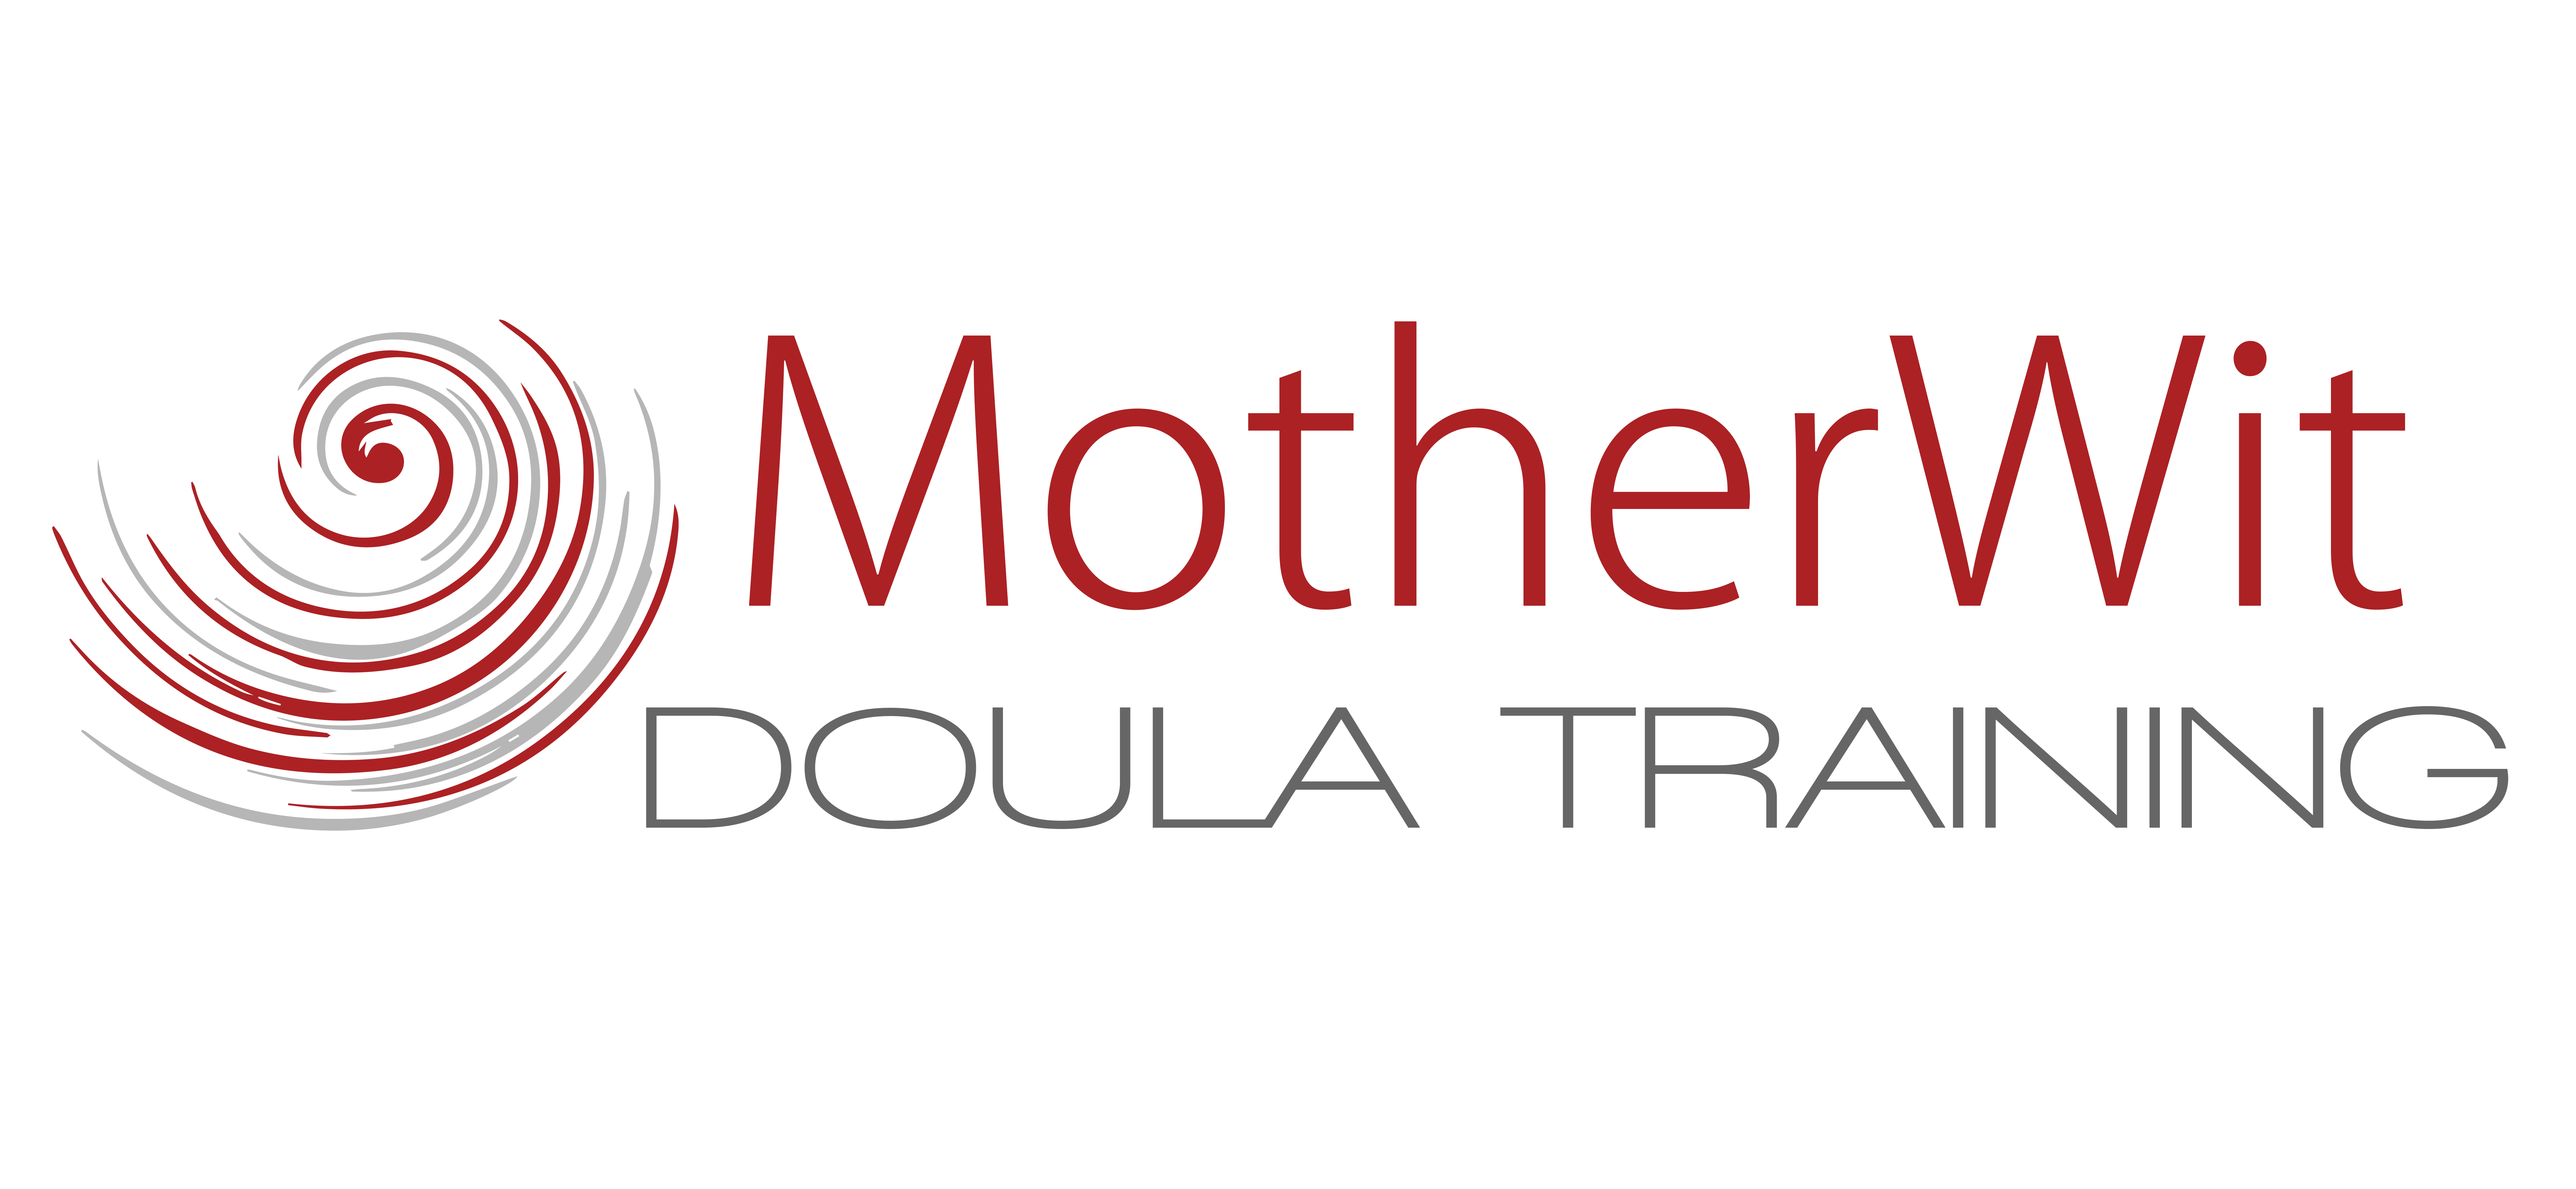 You are currently viewing Motherwit Postpartum Doula Training